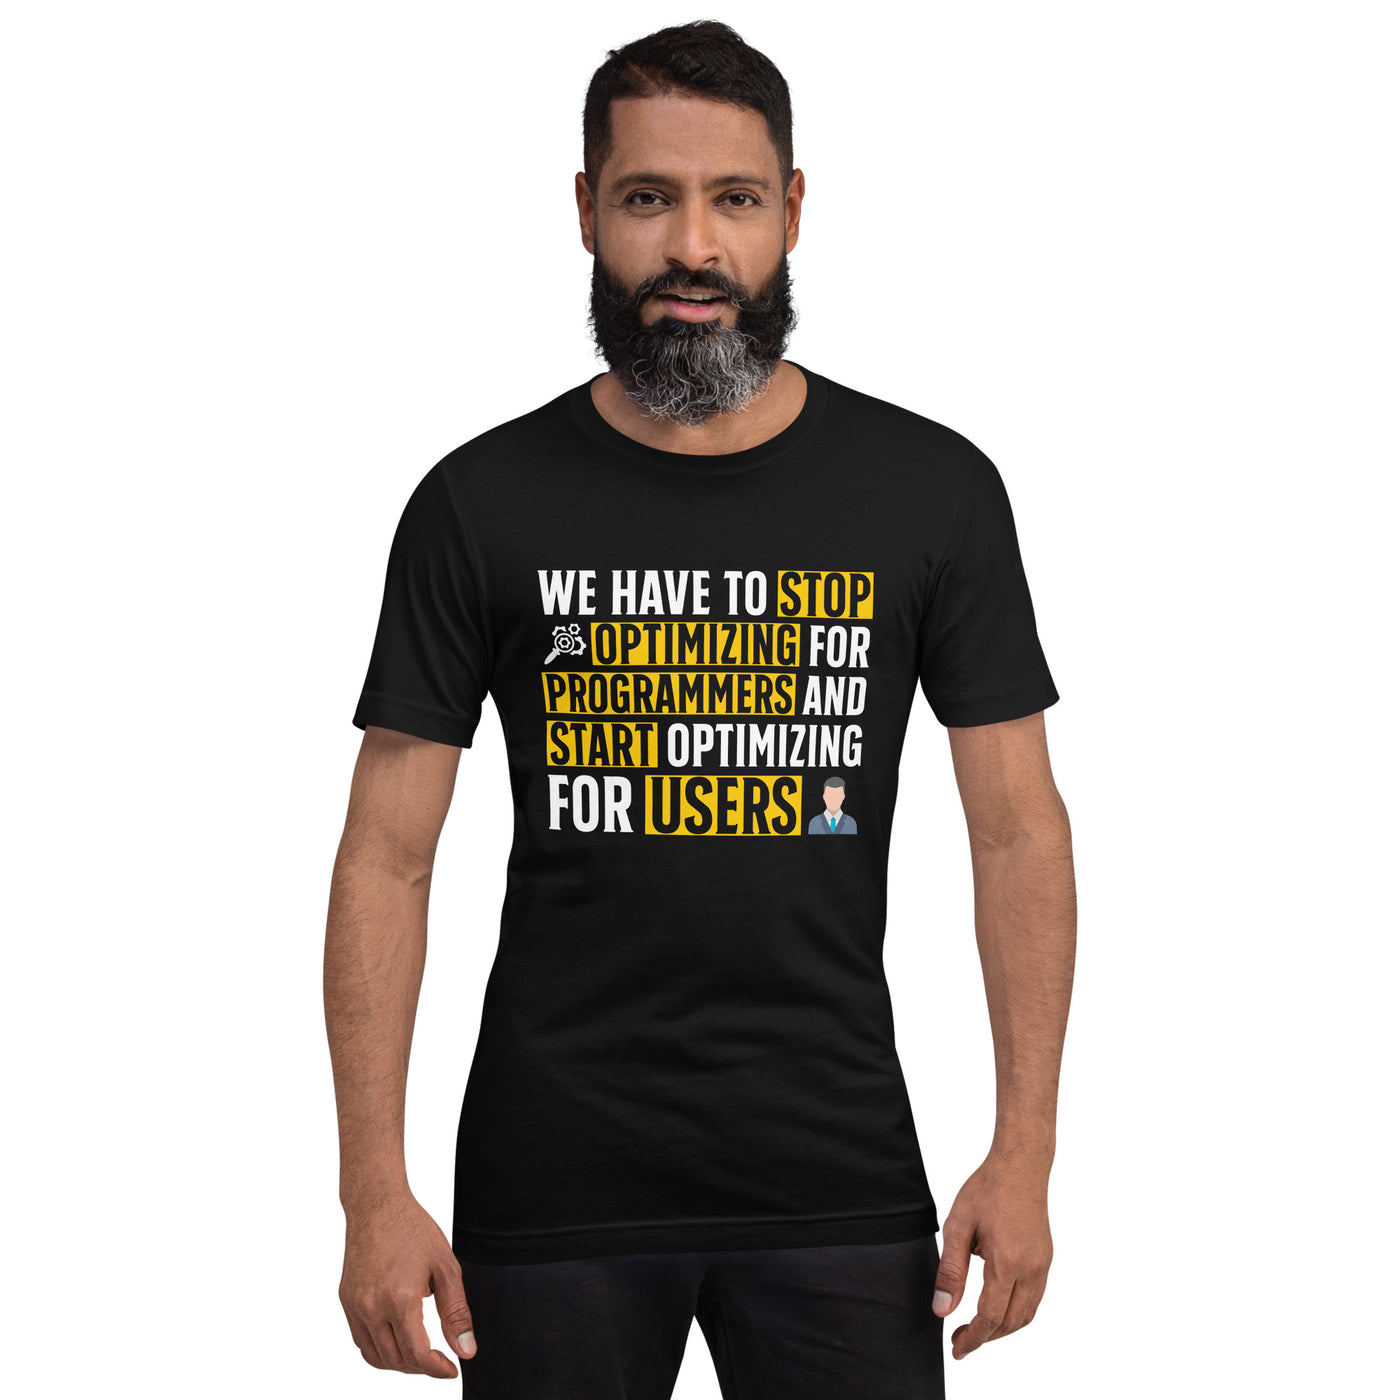 We have to stop optimizing for programmers and start optimizing for users - Unisex t-shirt